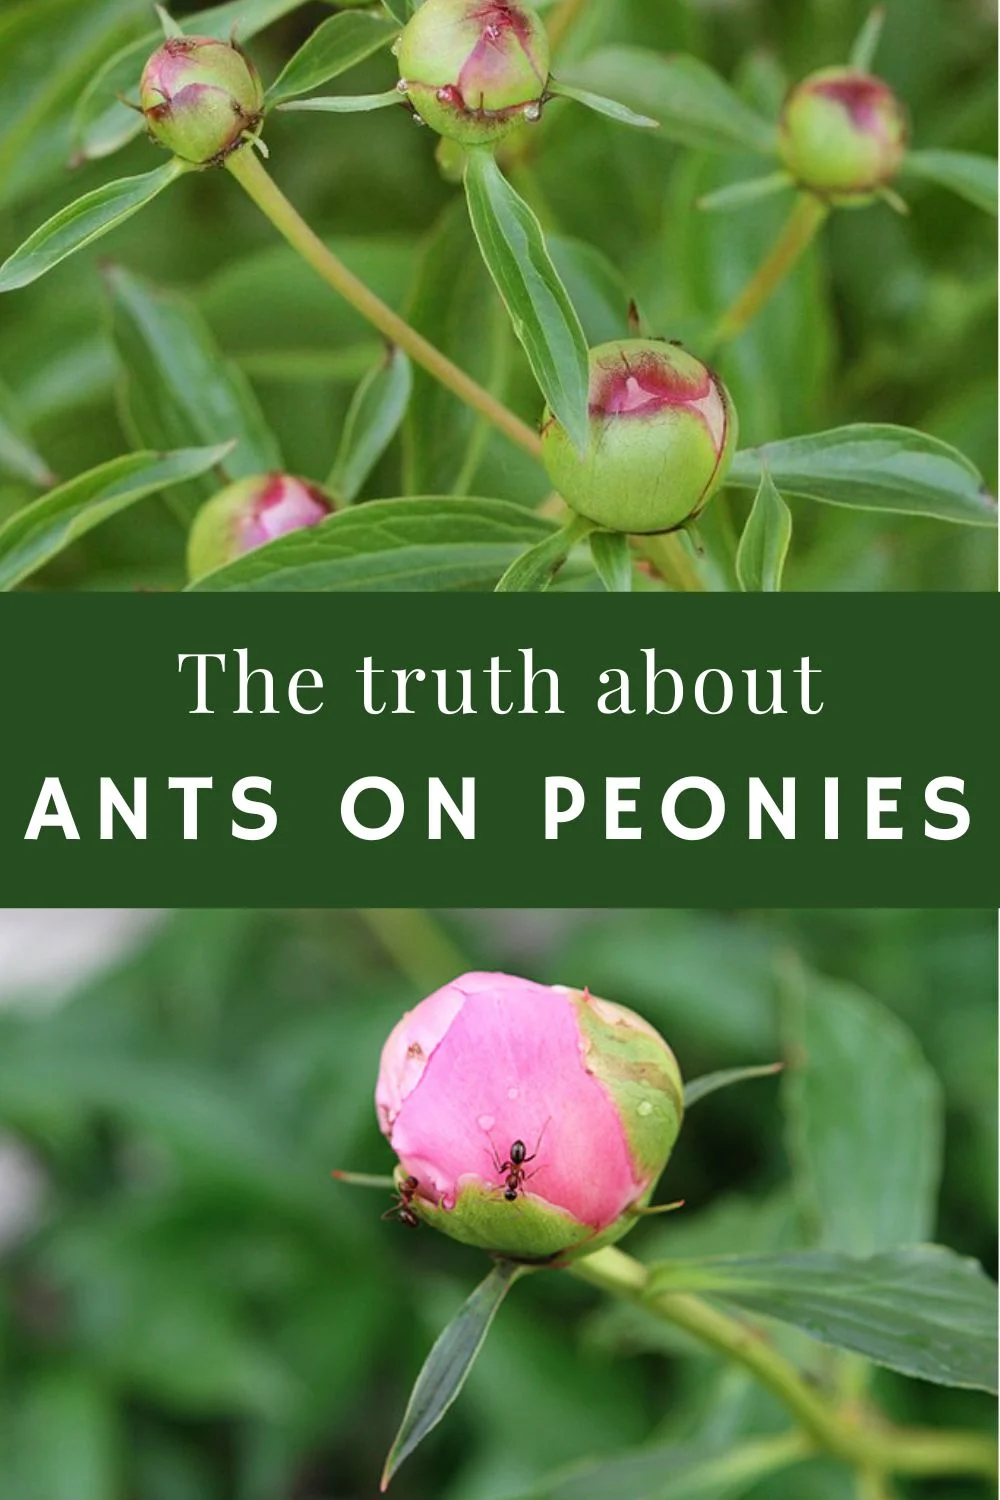 Peonies and Ants